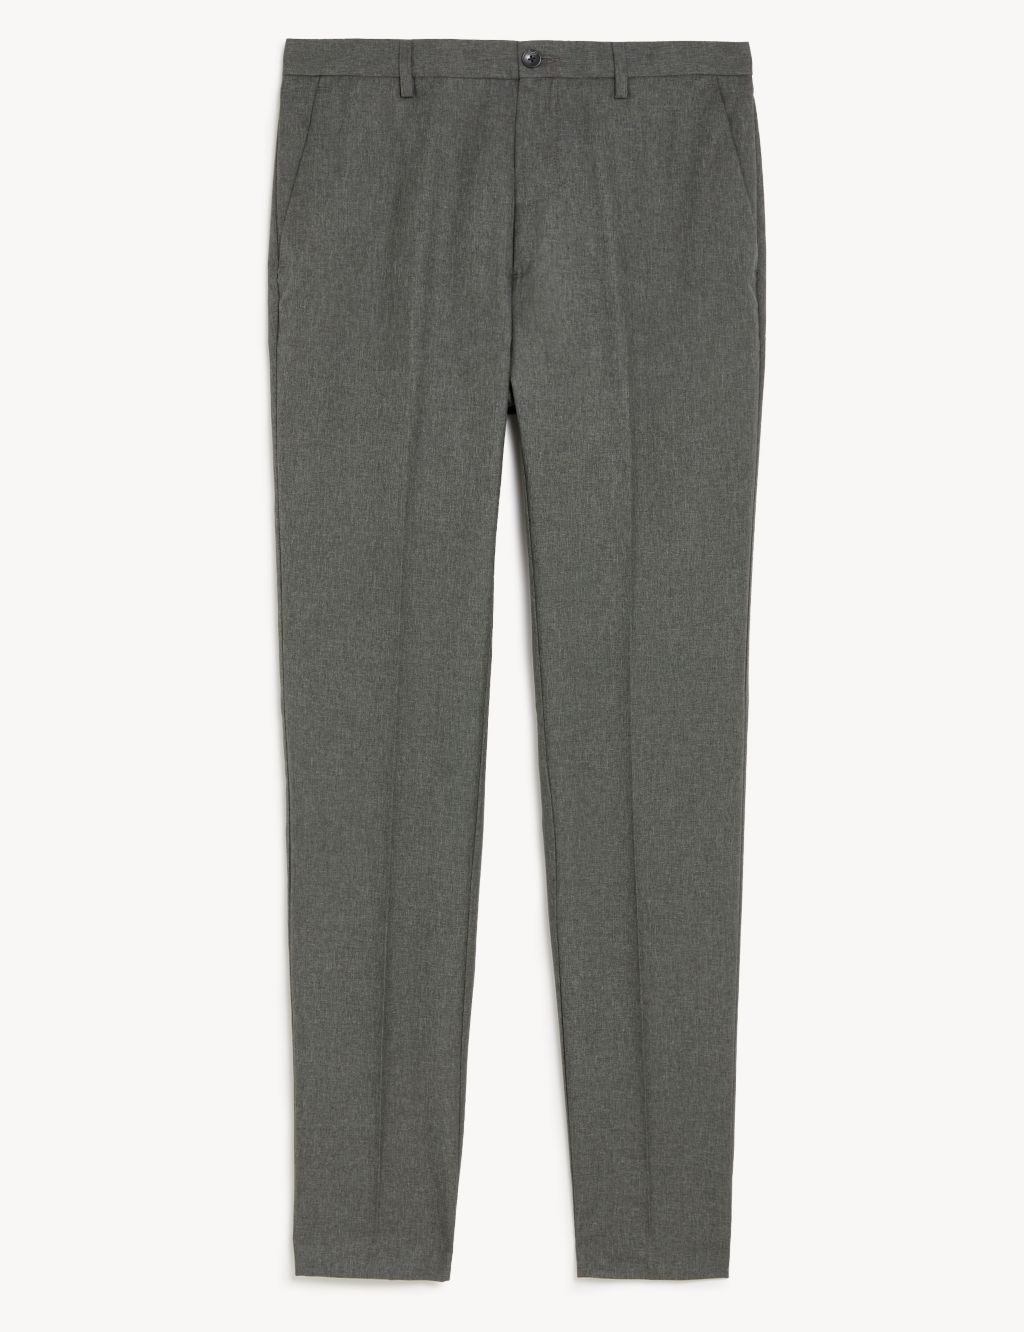 Skinny Fit Trousers image 7